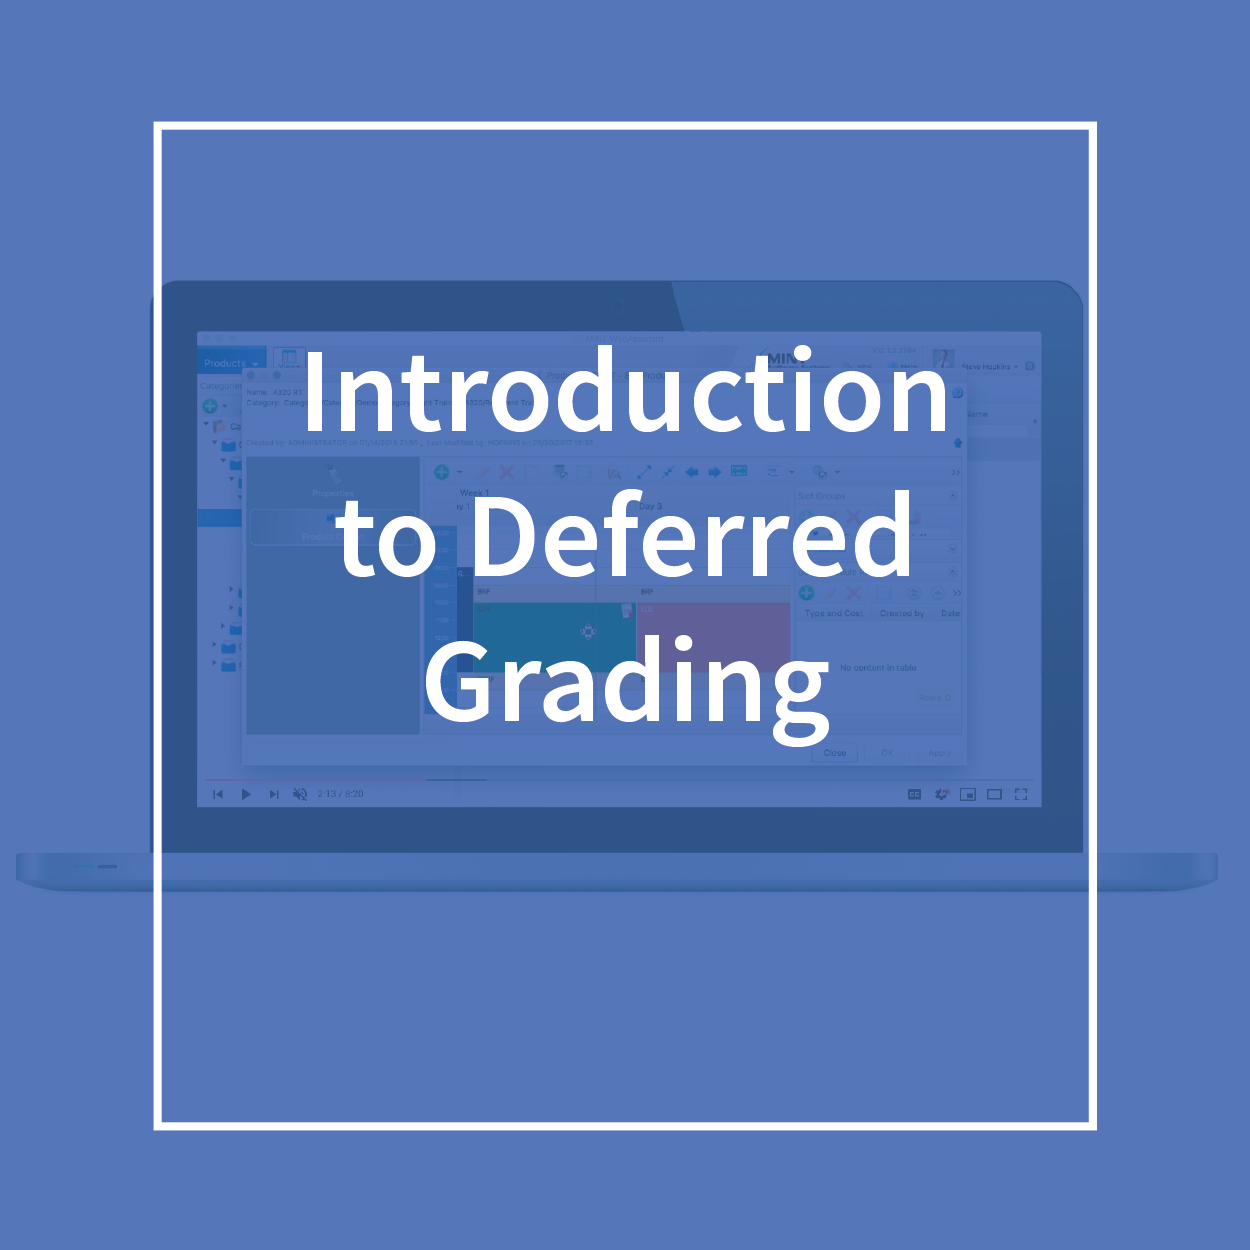 Introduction to Deferred Grading